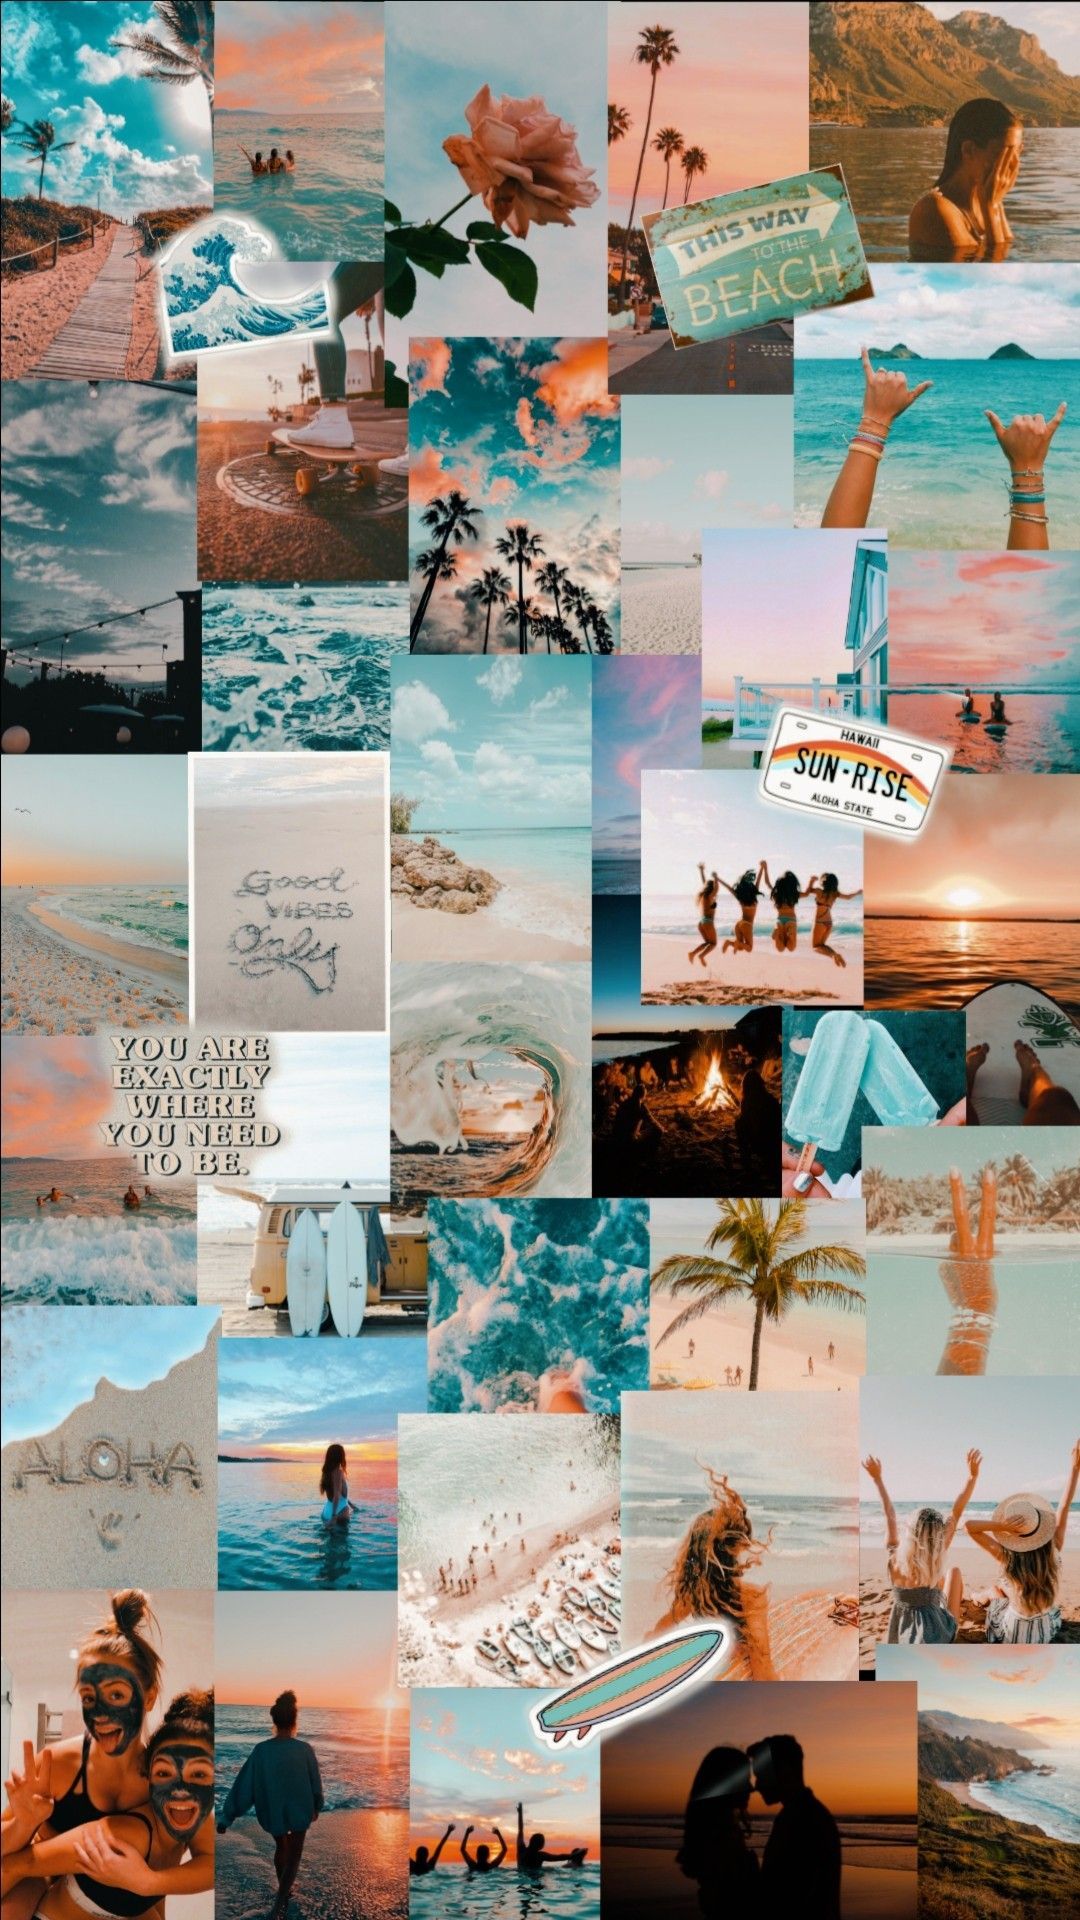 Aesthetic phone background collage of beach photos and quotes - Summer